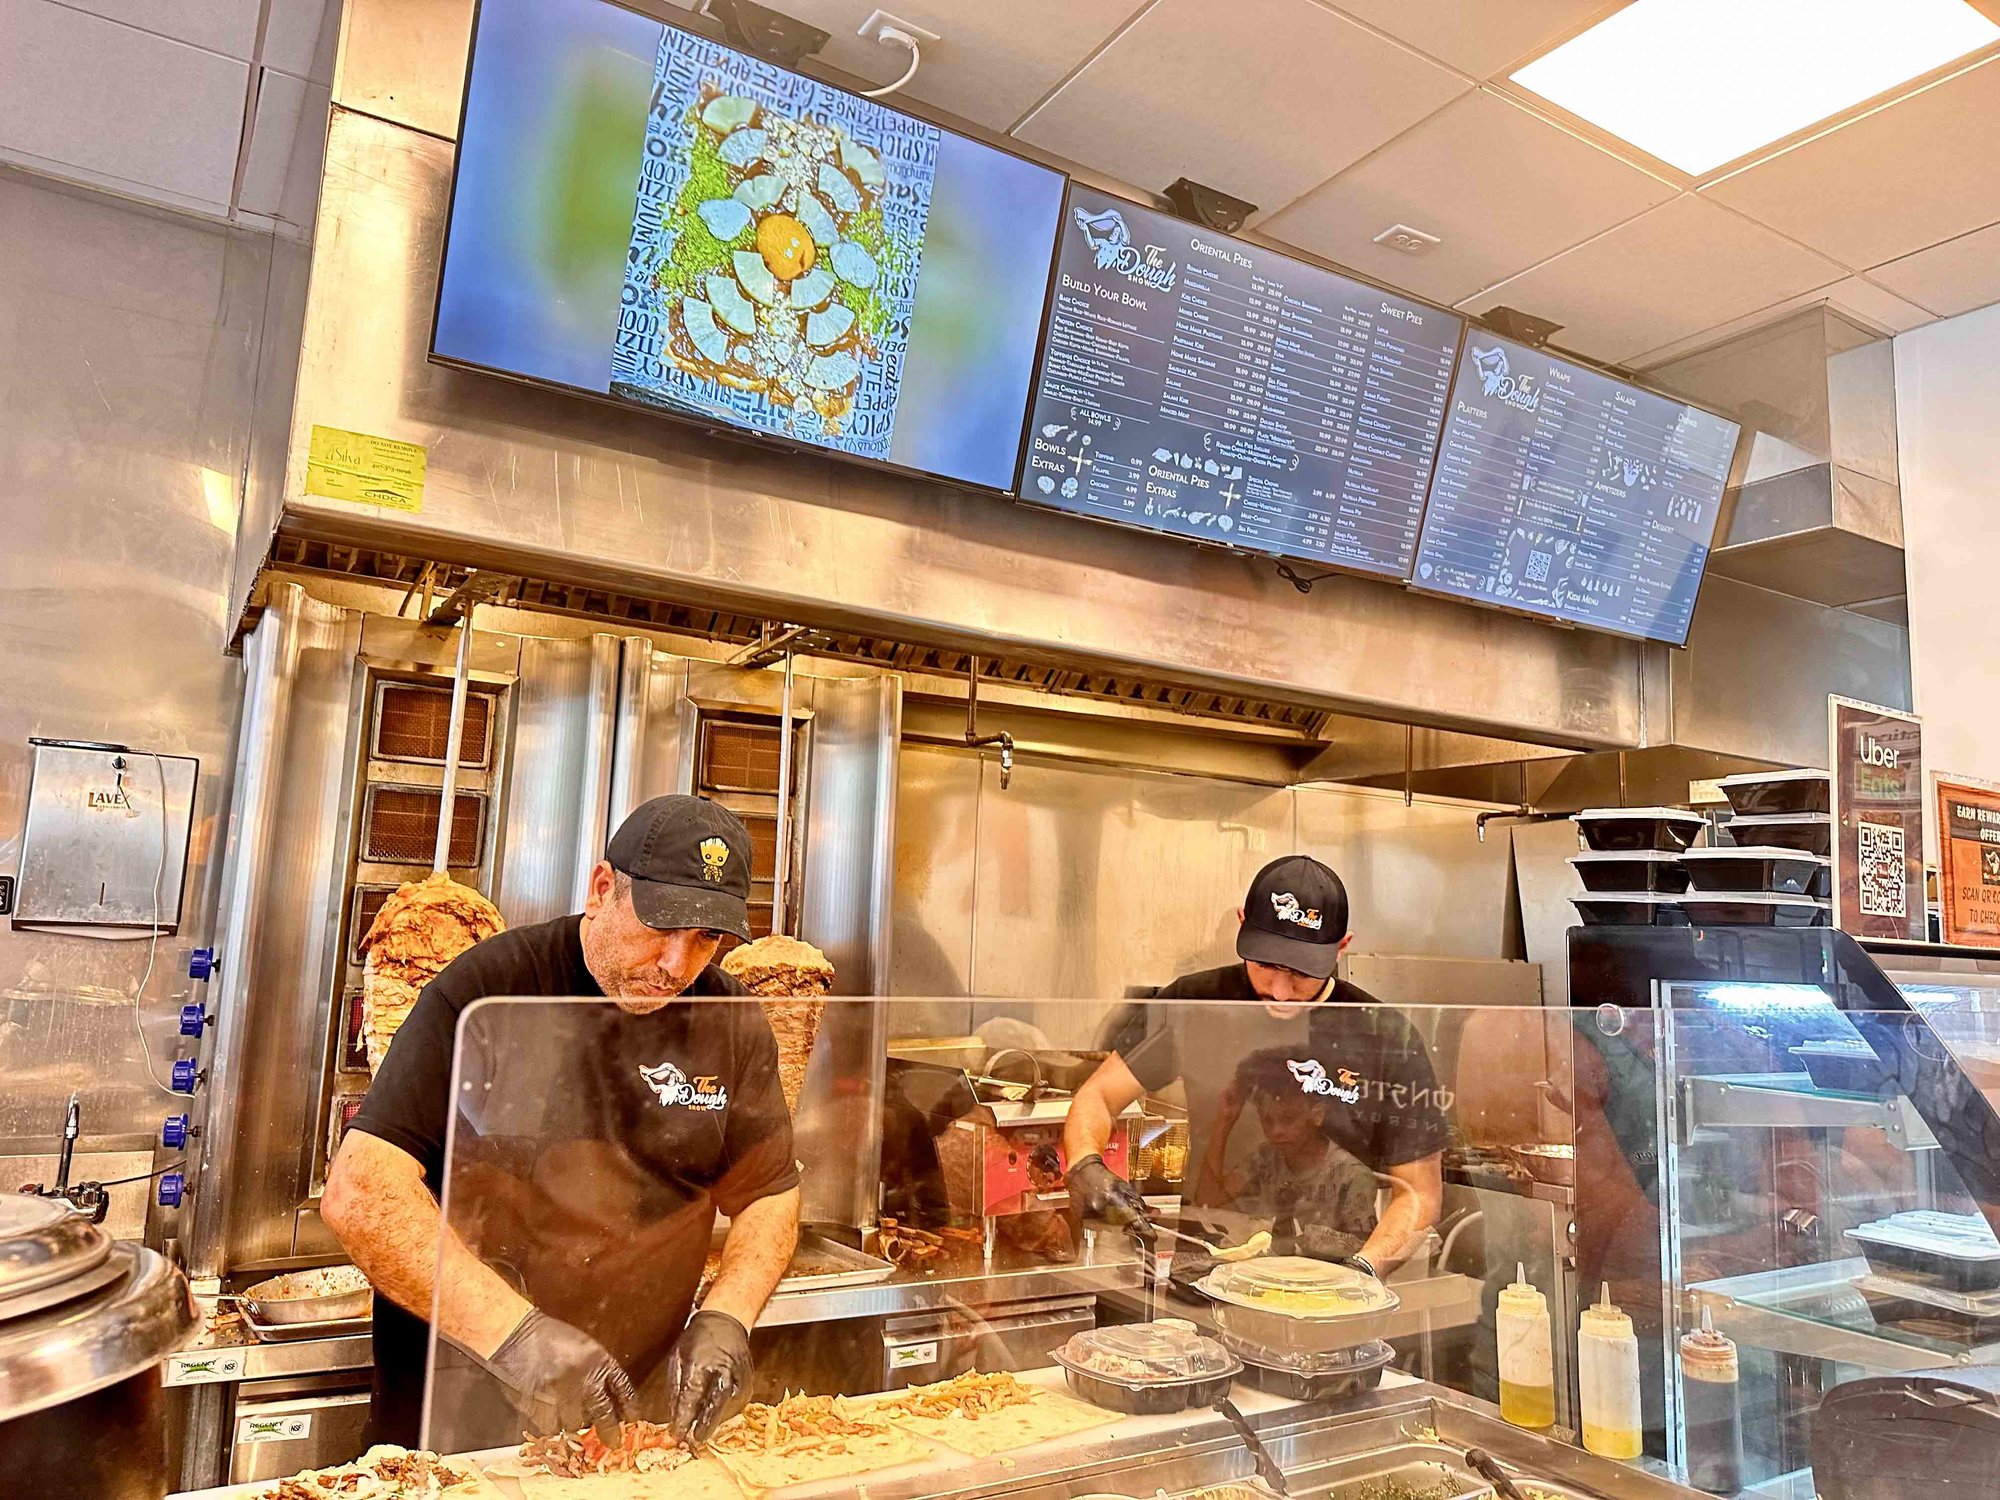 two chefs cooking behind glass with the dough show digital menu above the counter